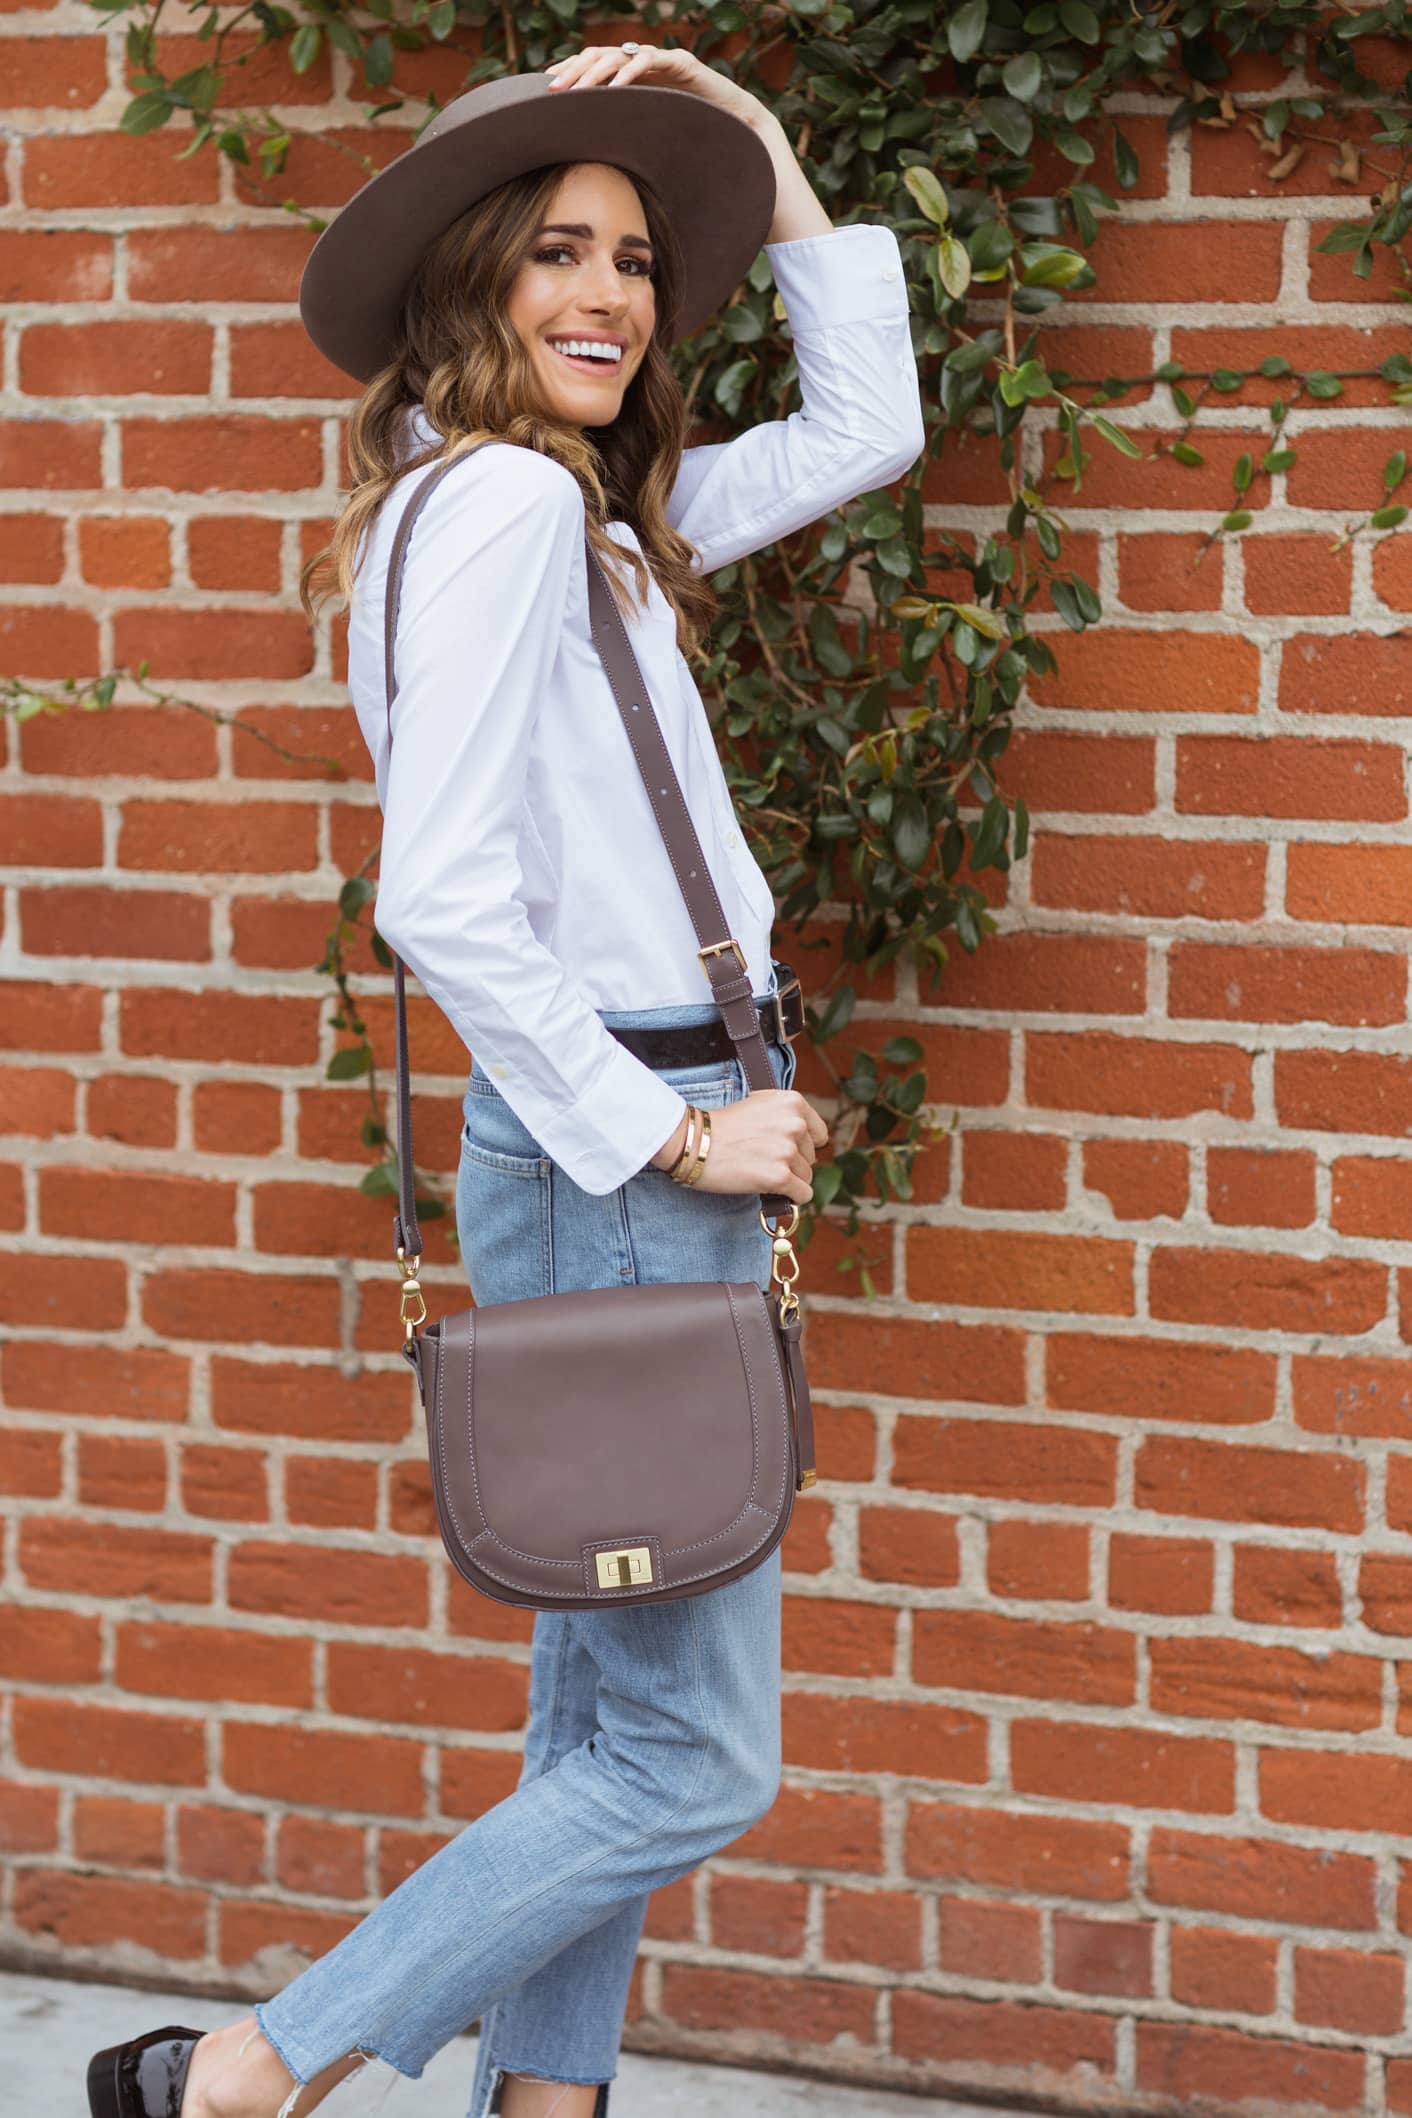 Louise Roe with red Gucci crossbody bag 2 - Front Roe by Louise Roe